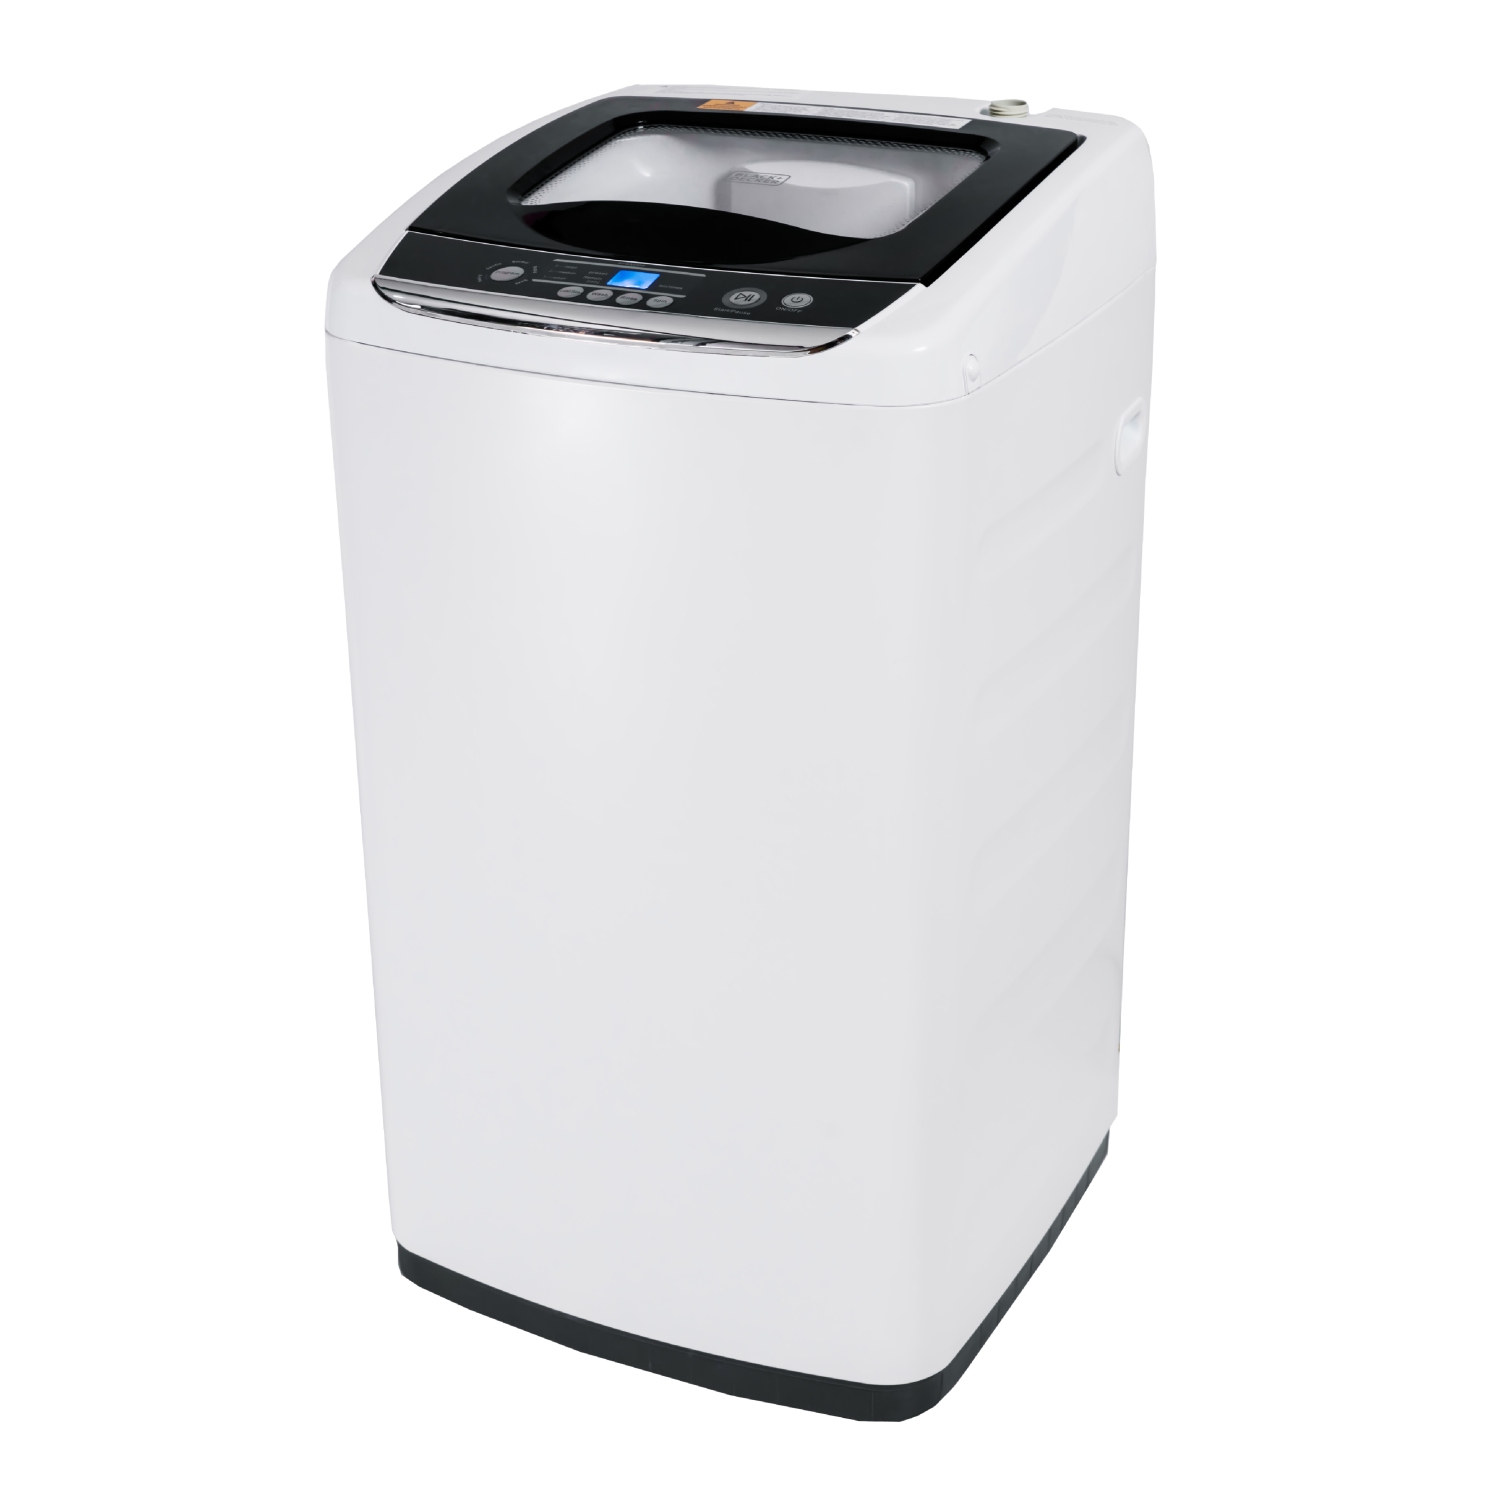 BLACK+DECKER Small Portable Washer, Portable Washer 0.9 Cu. Ft. with 5 Cycles, Transparent Lid & LED Display